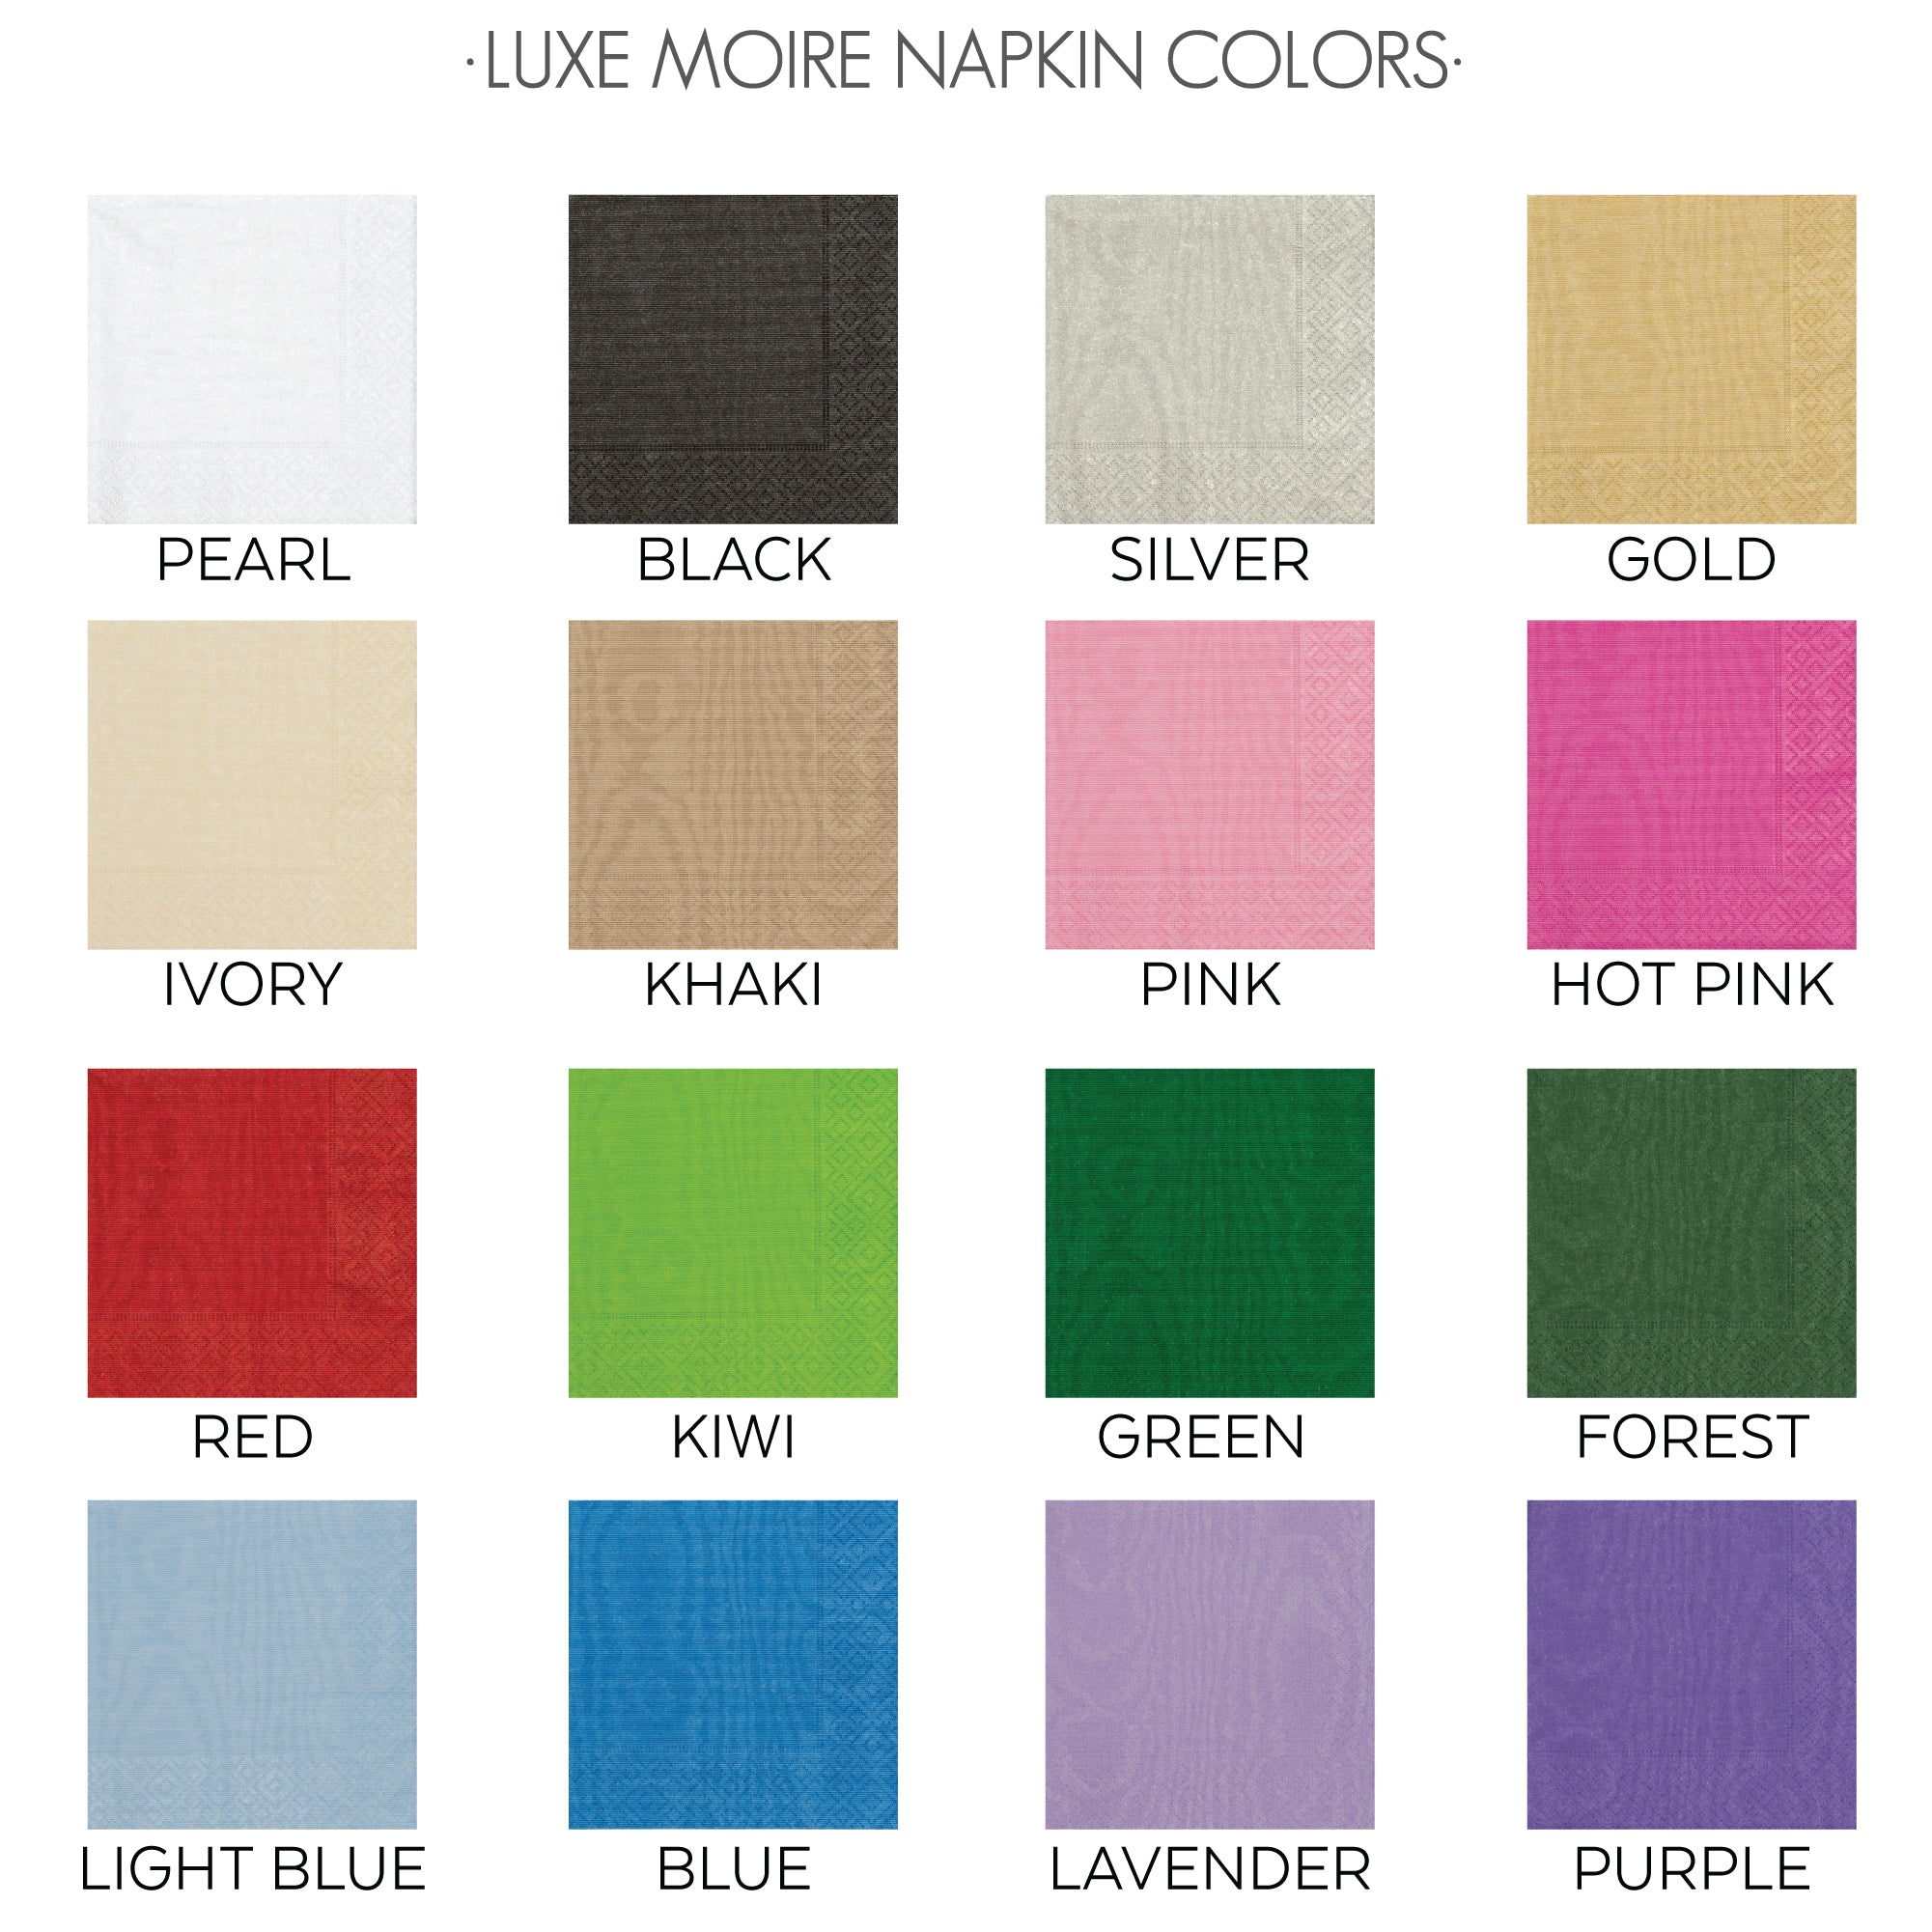 Luxe Moire Napkin Colors